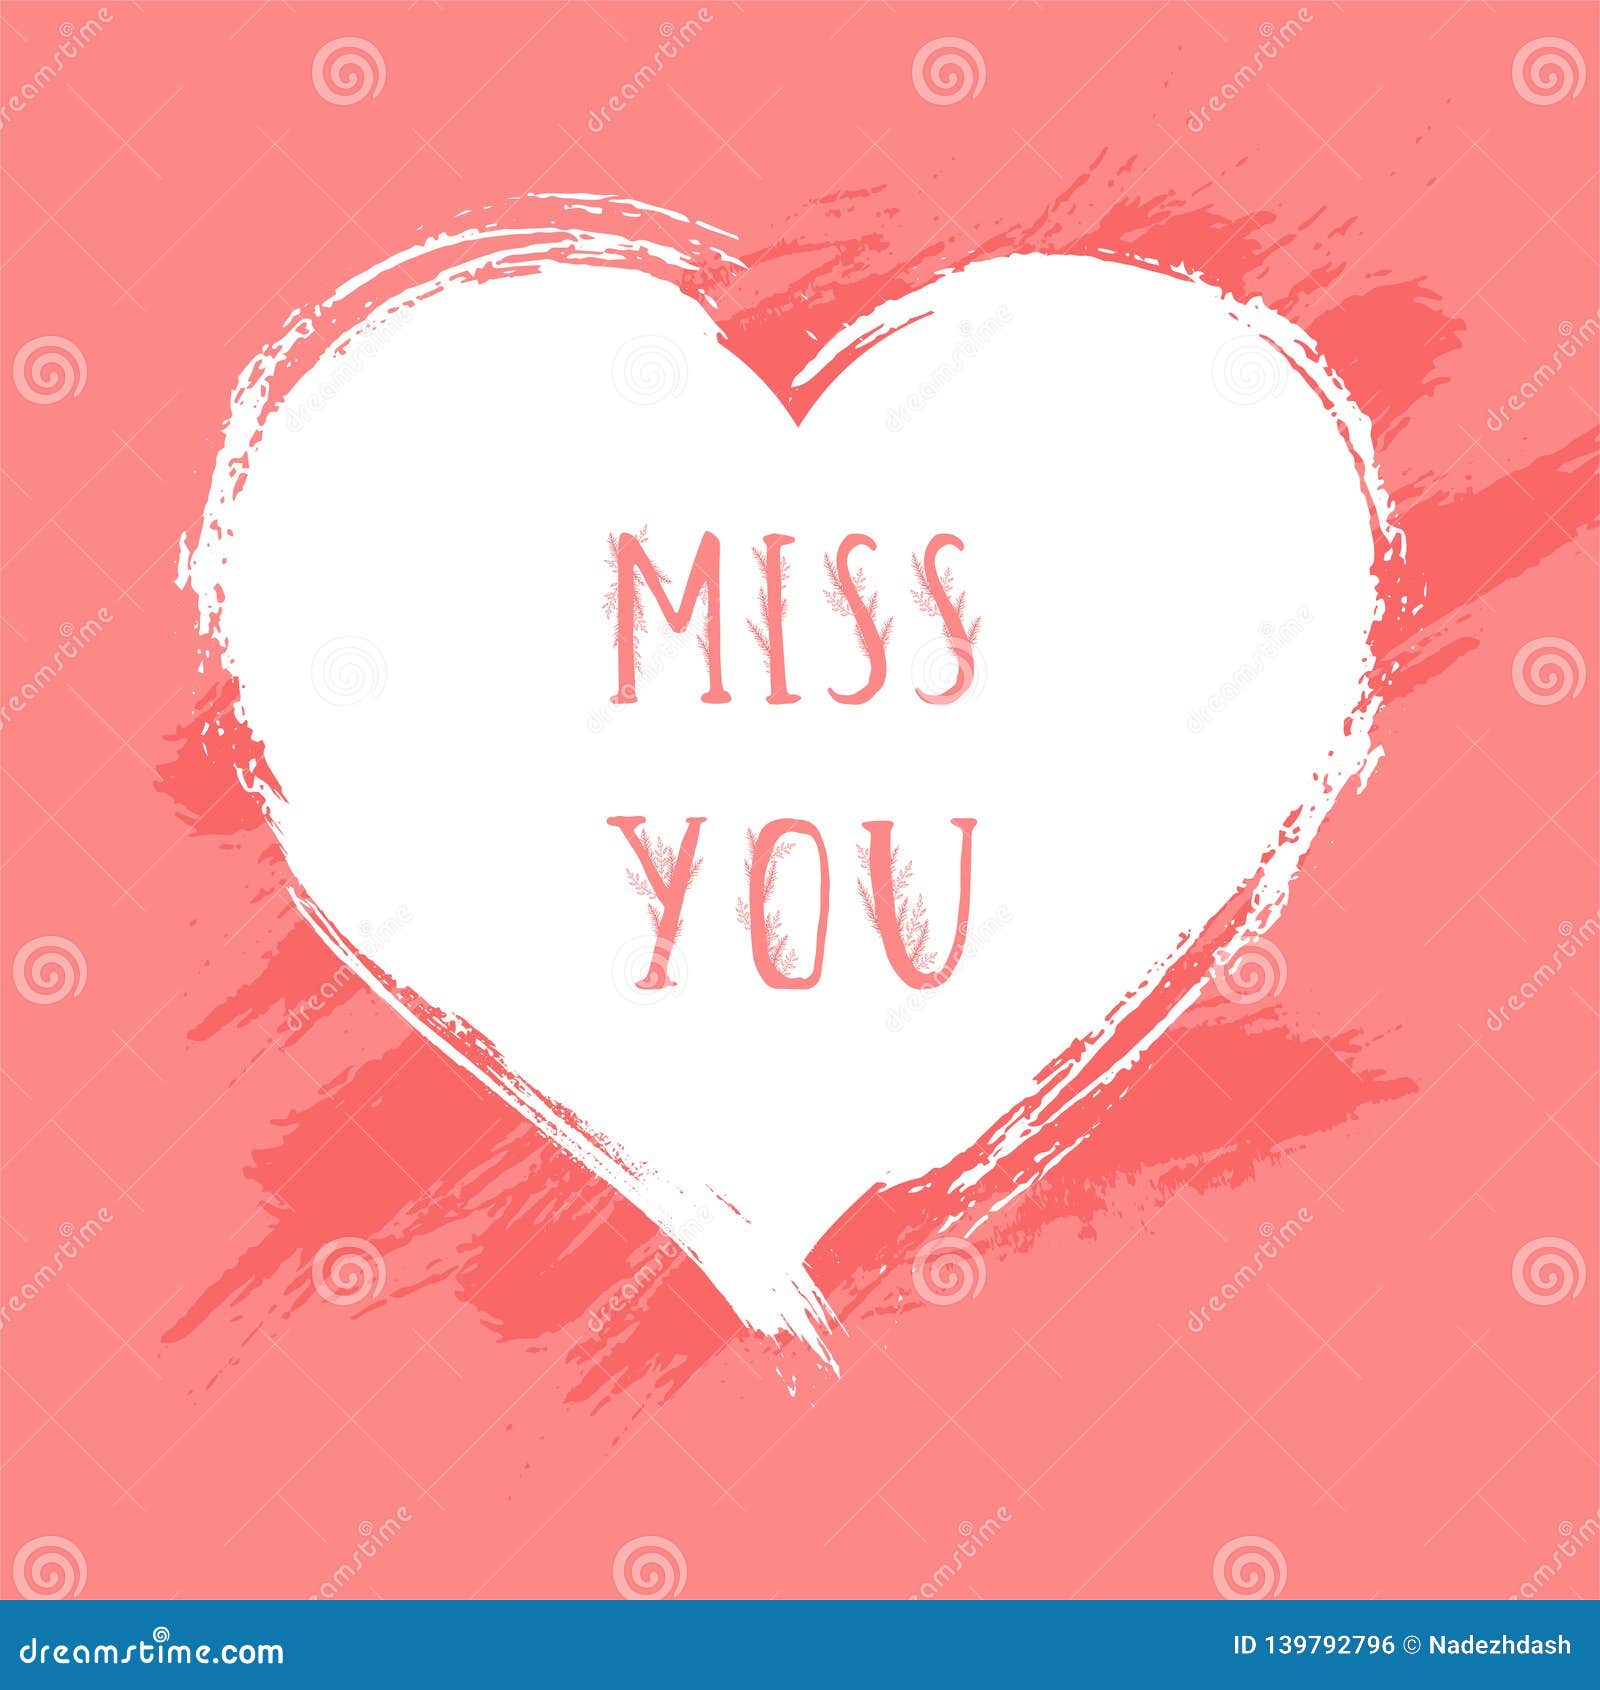 Miss you heart